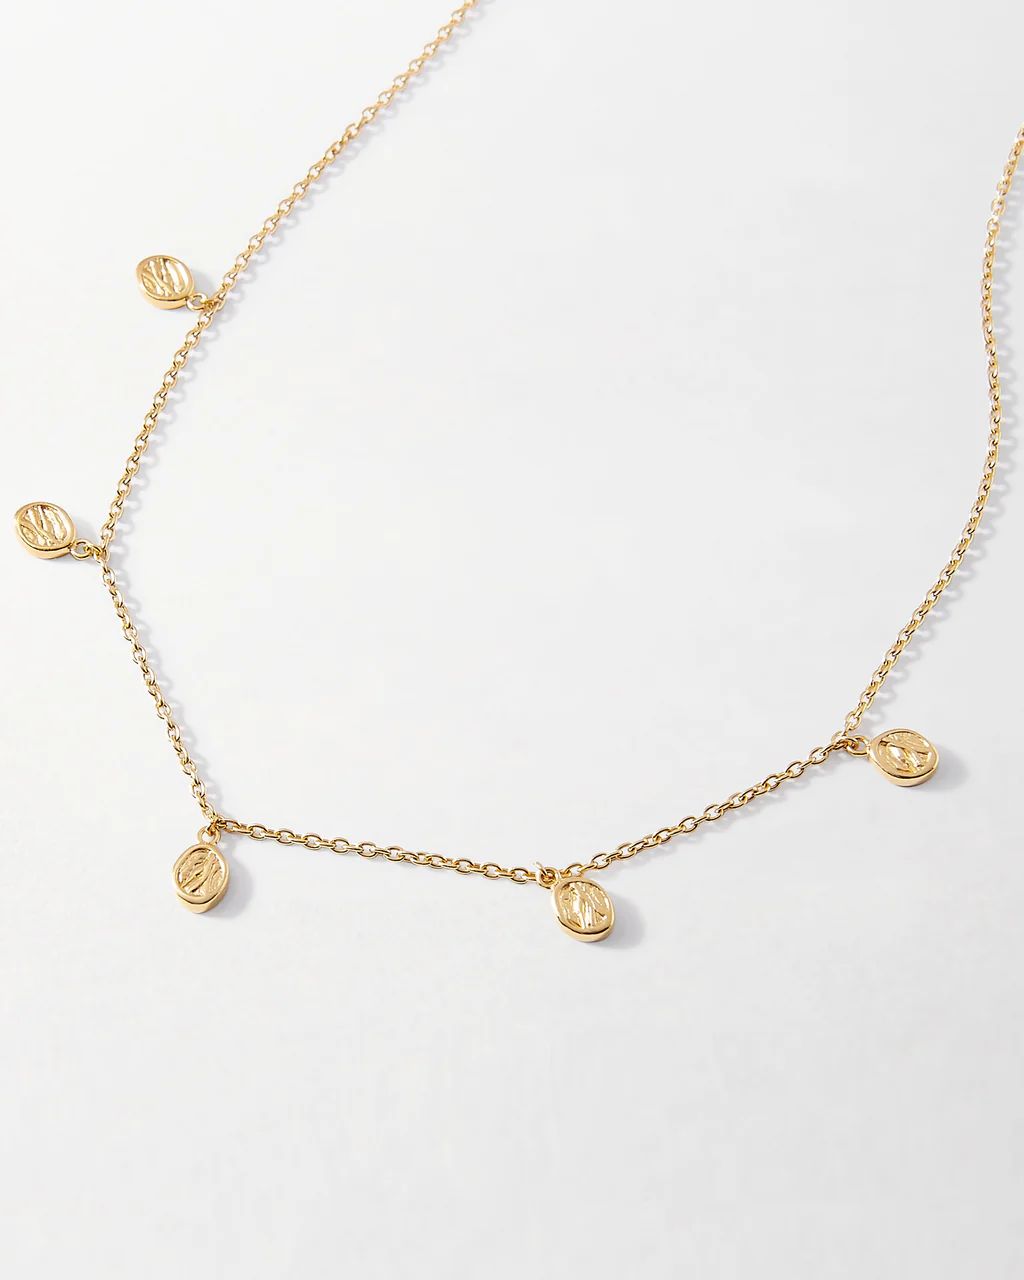 Victoria Coin Drop Choker Necklace - Gold | Edge of Ember Ltd